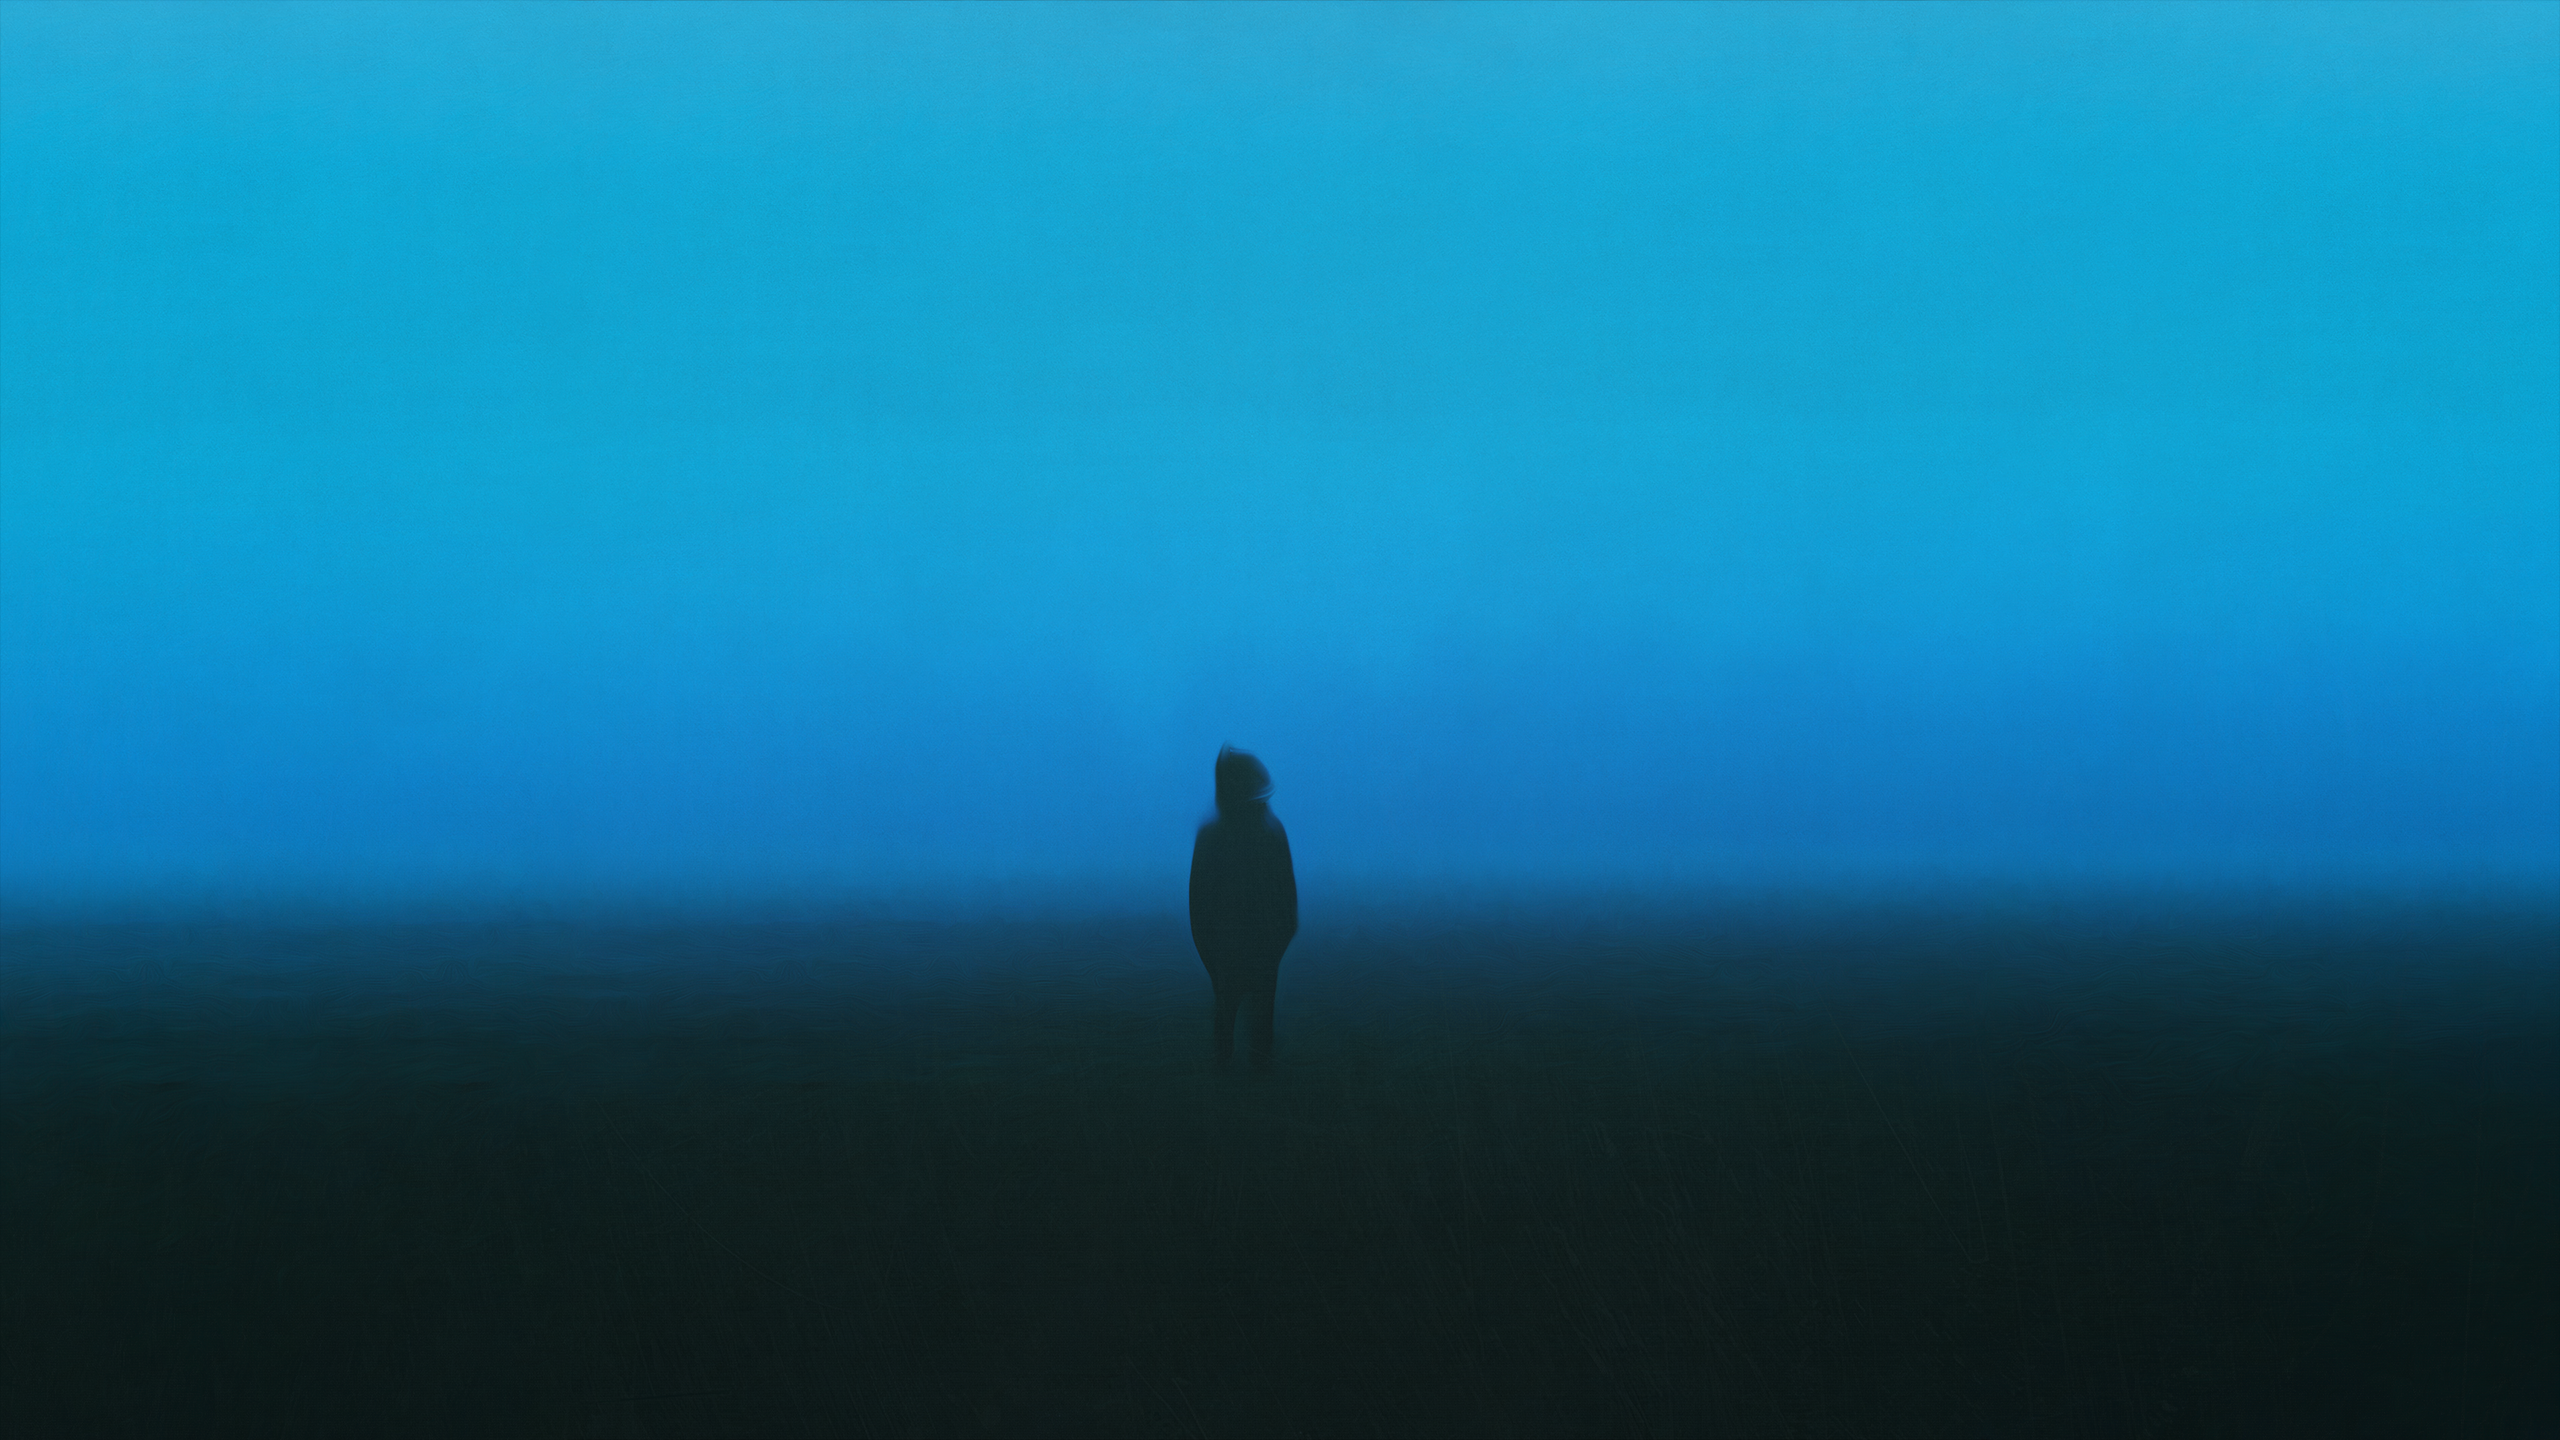 Midnight Night Simple Background Dark Loneliness Alone Horror Sky Oil Painting Depressing Sadness 2560x1440